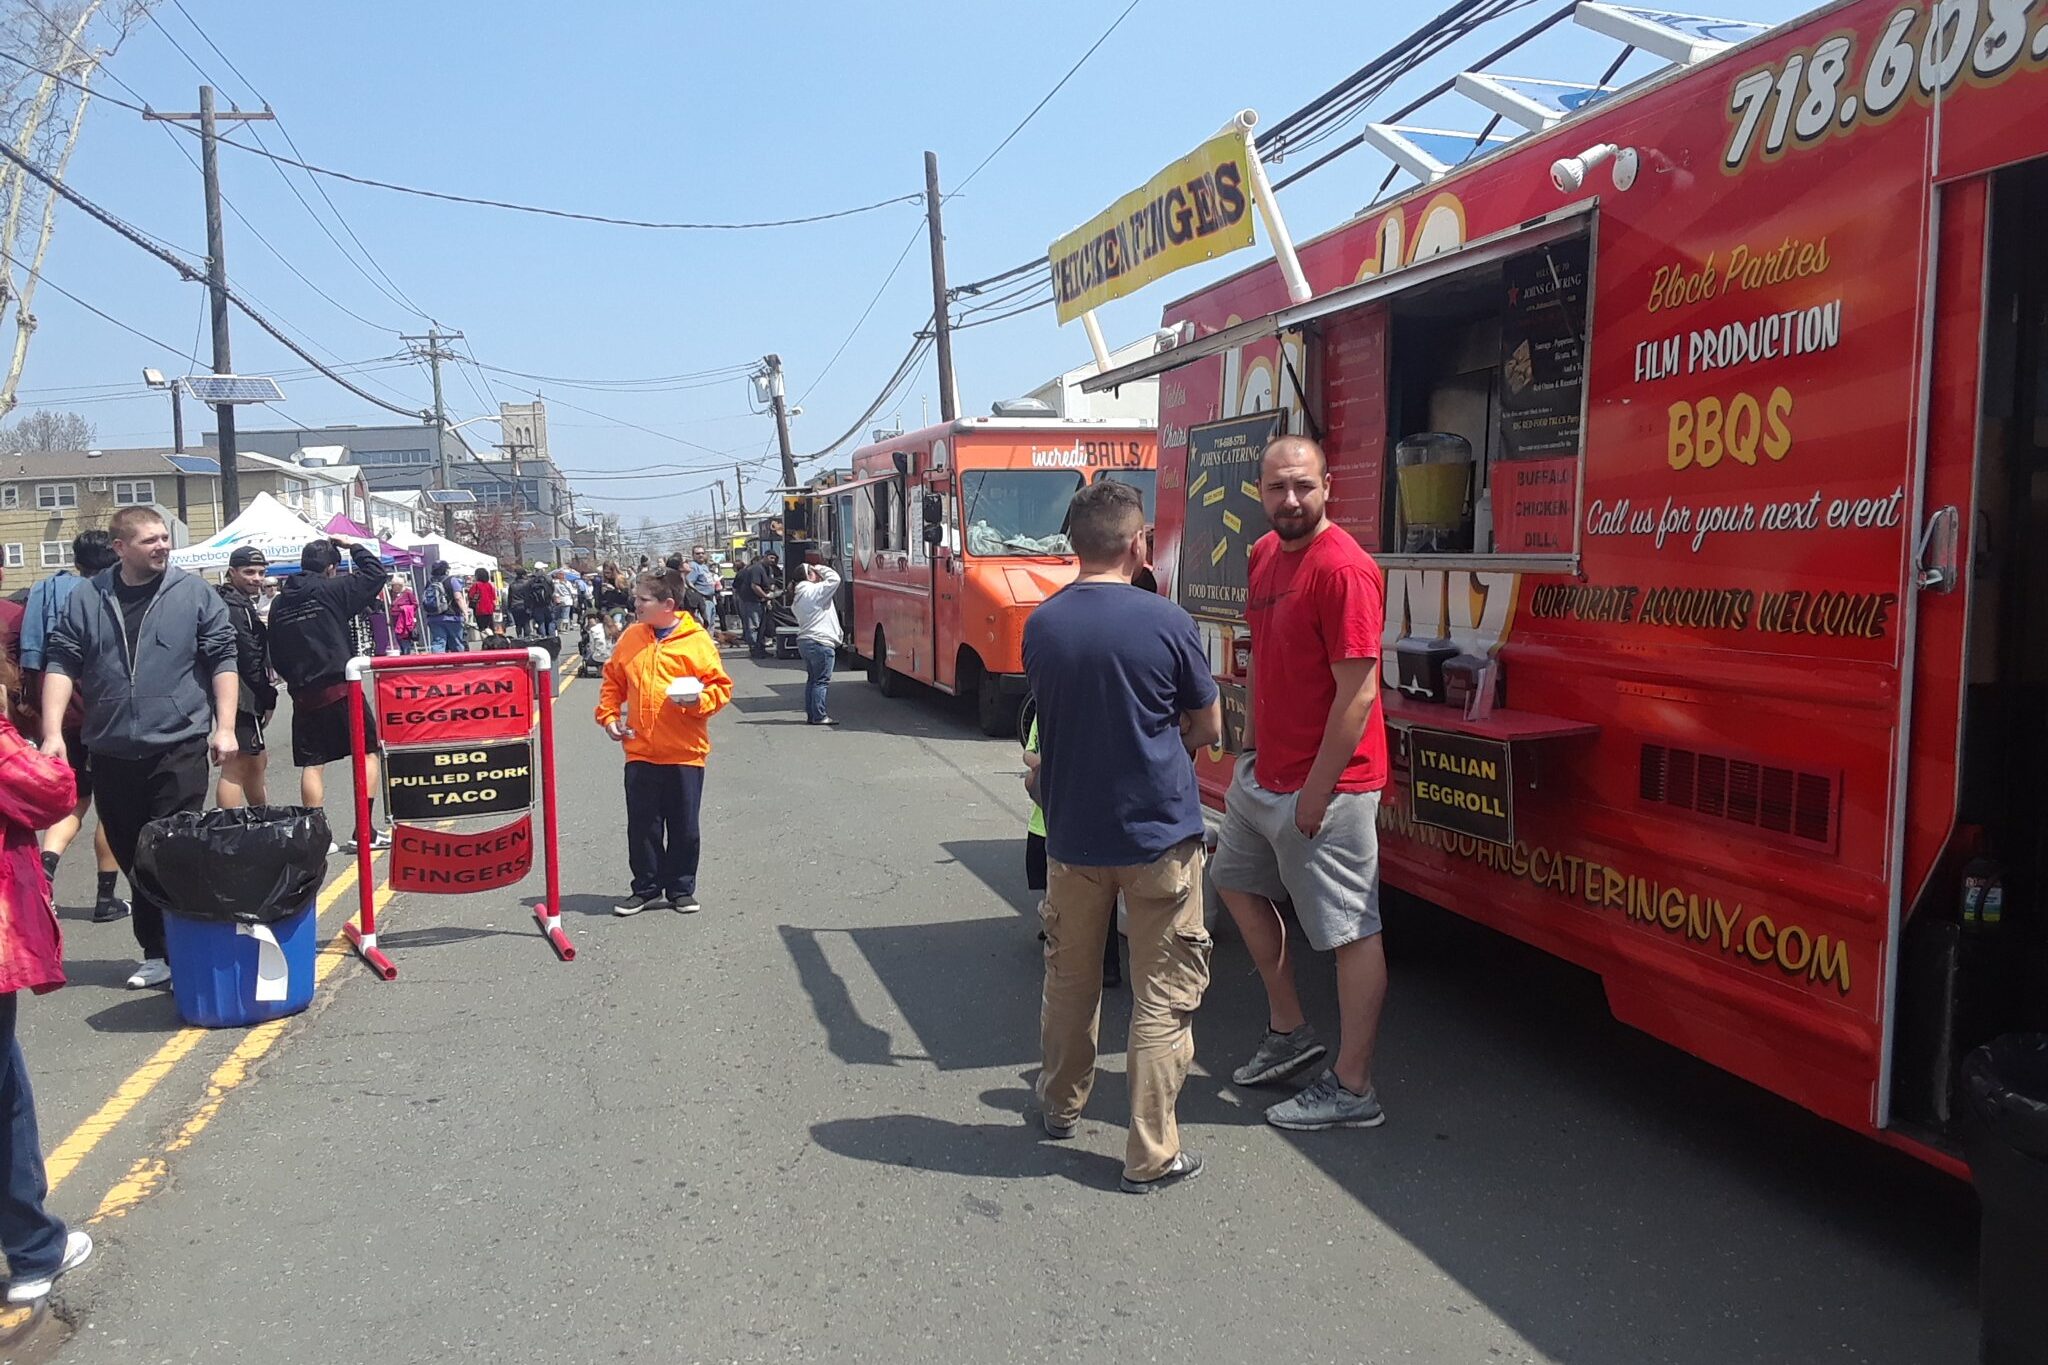 BAYONNE FOOD TRUCK FESTIVAL MOVED TO SATURDAY, MAY 14 DUE TO EXPECTED